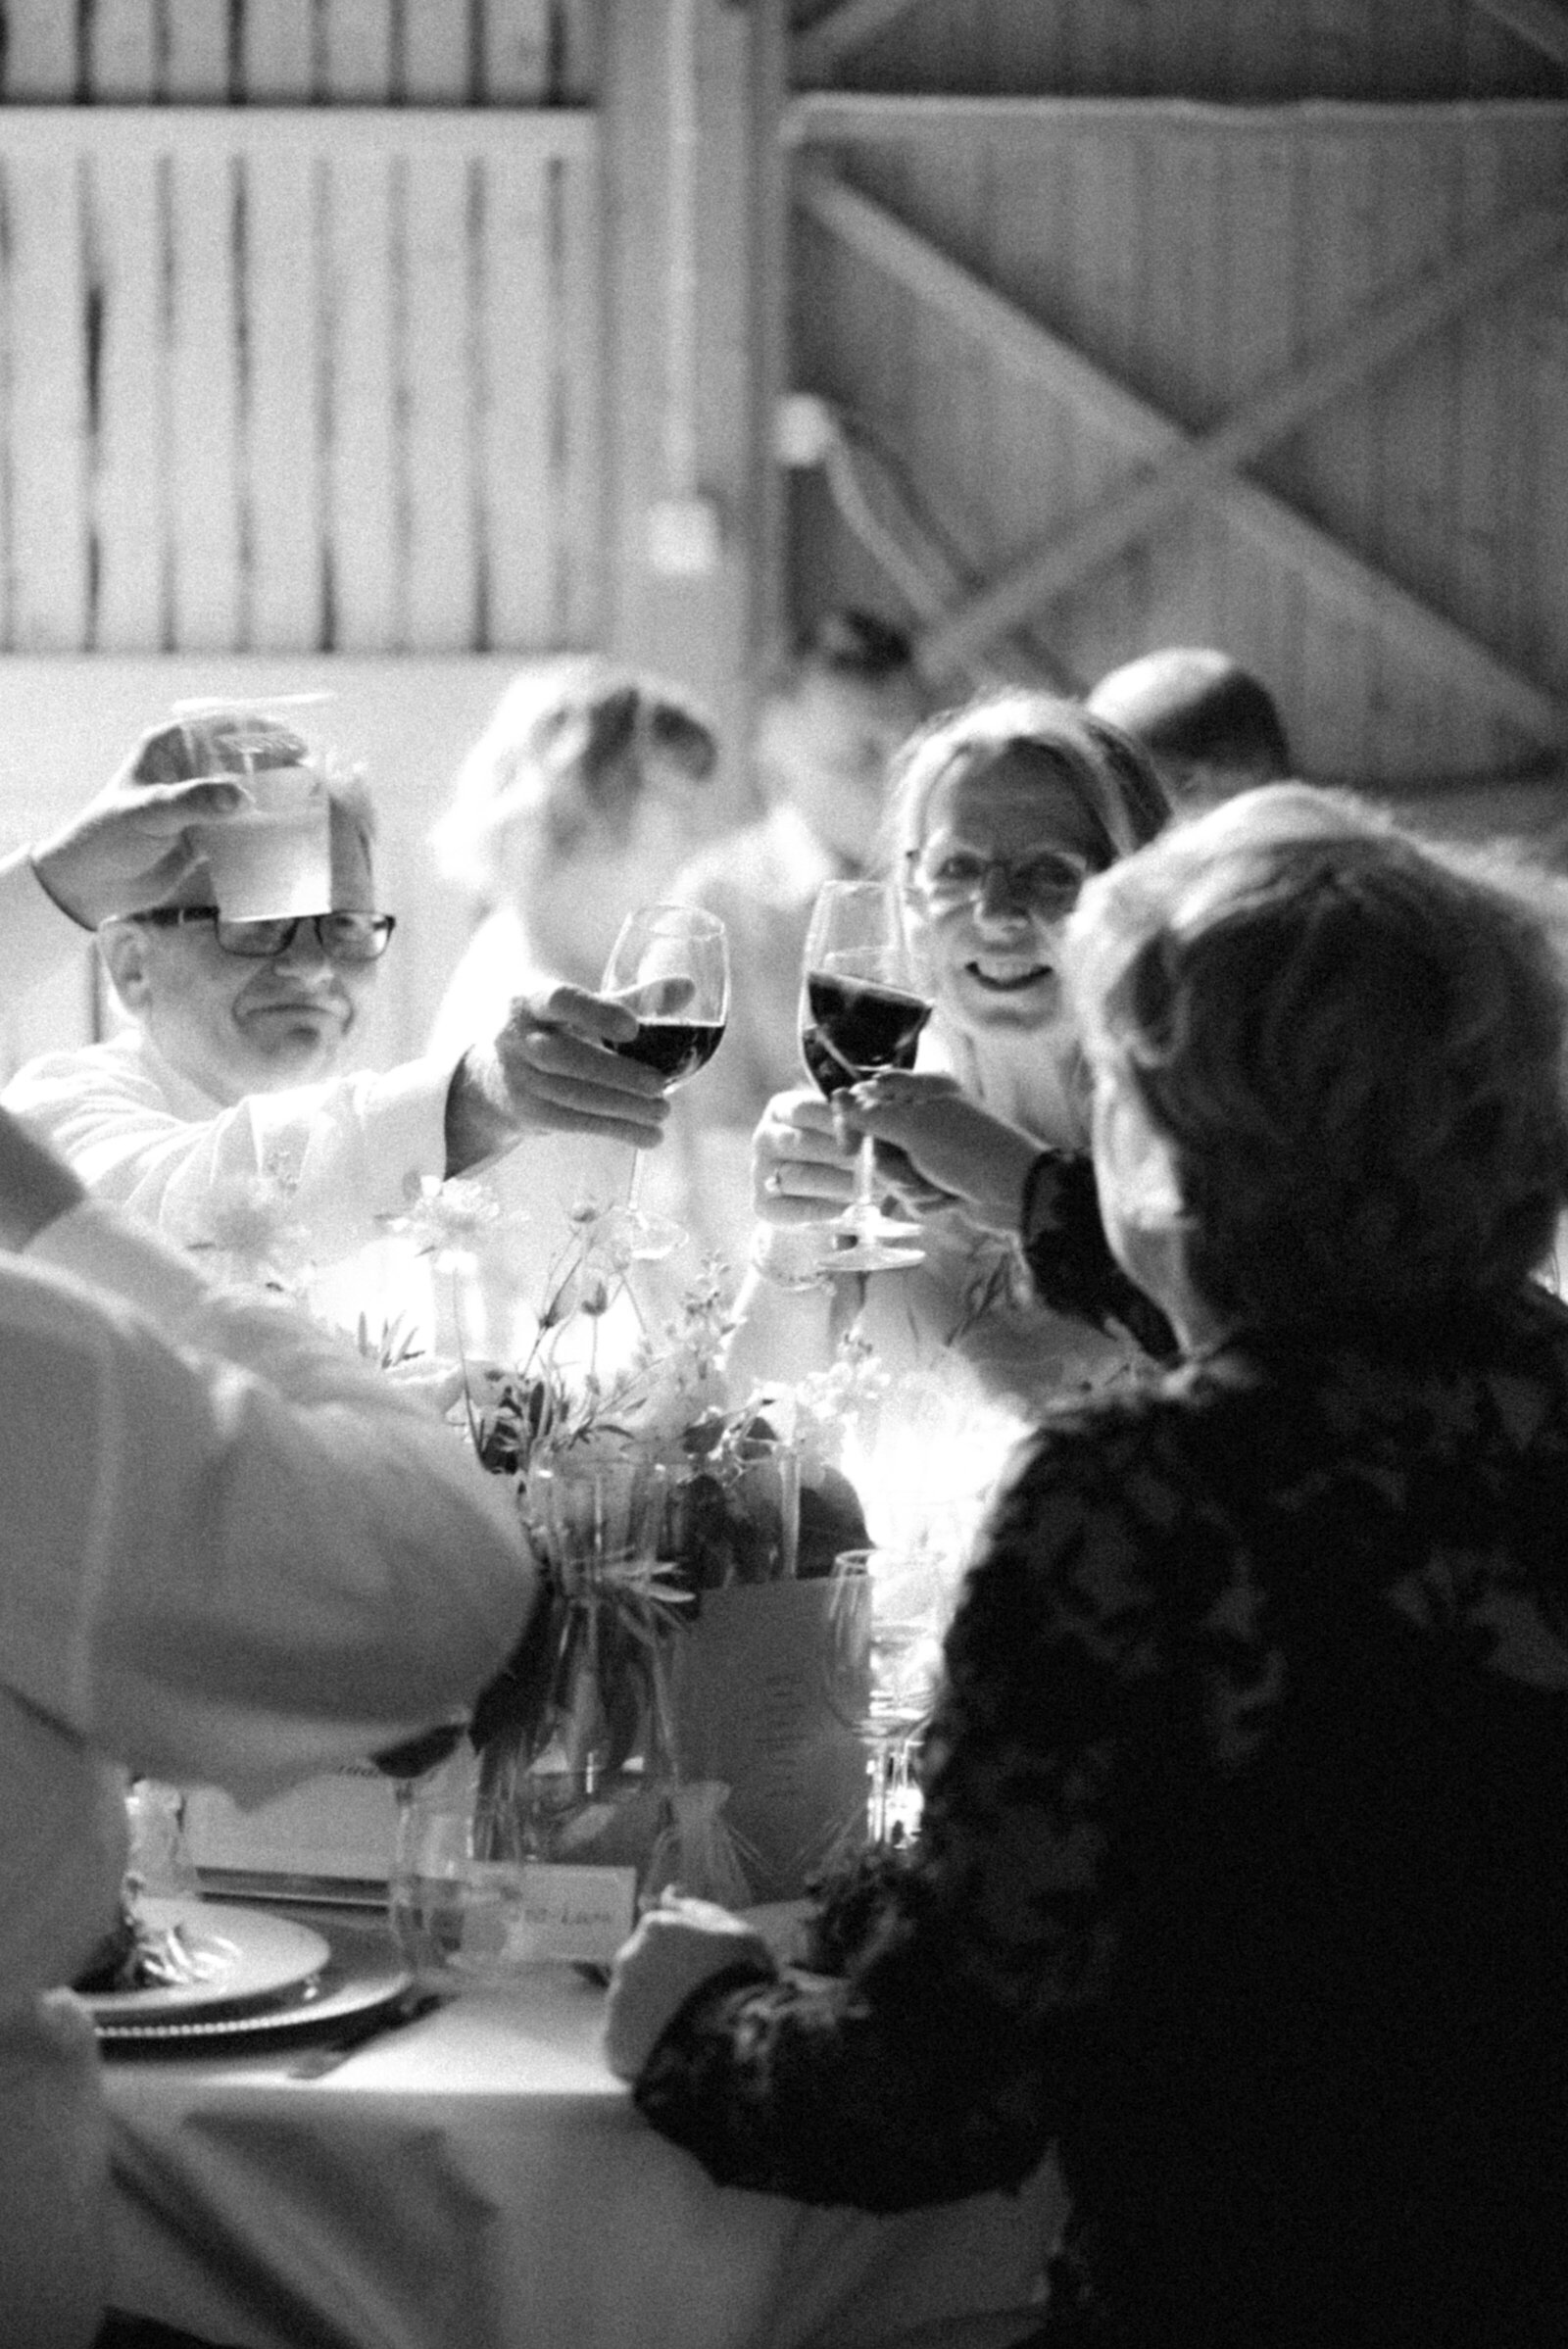 Guests toasting in the wedding in an image captured by wedding photographer Hannika Gabrielsson.